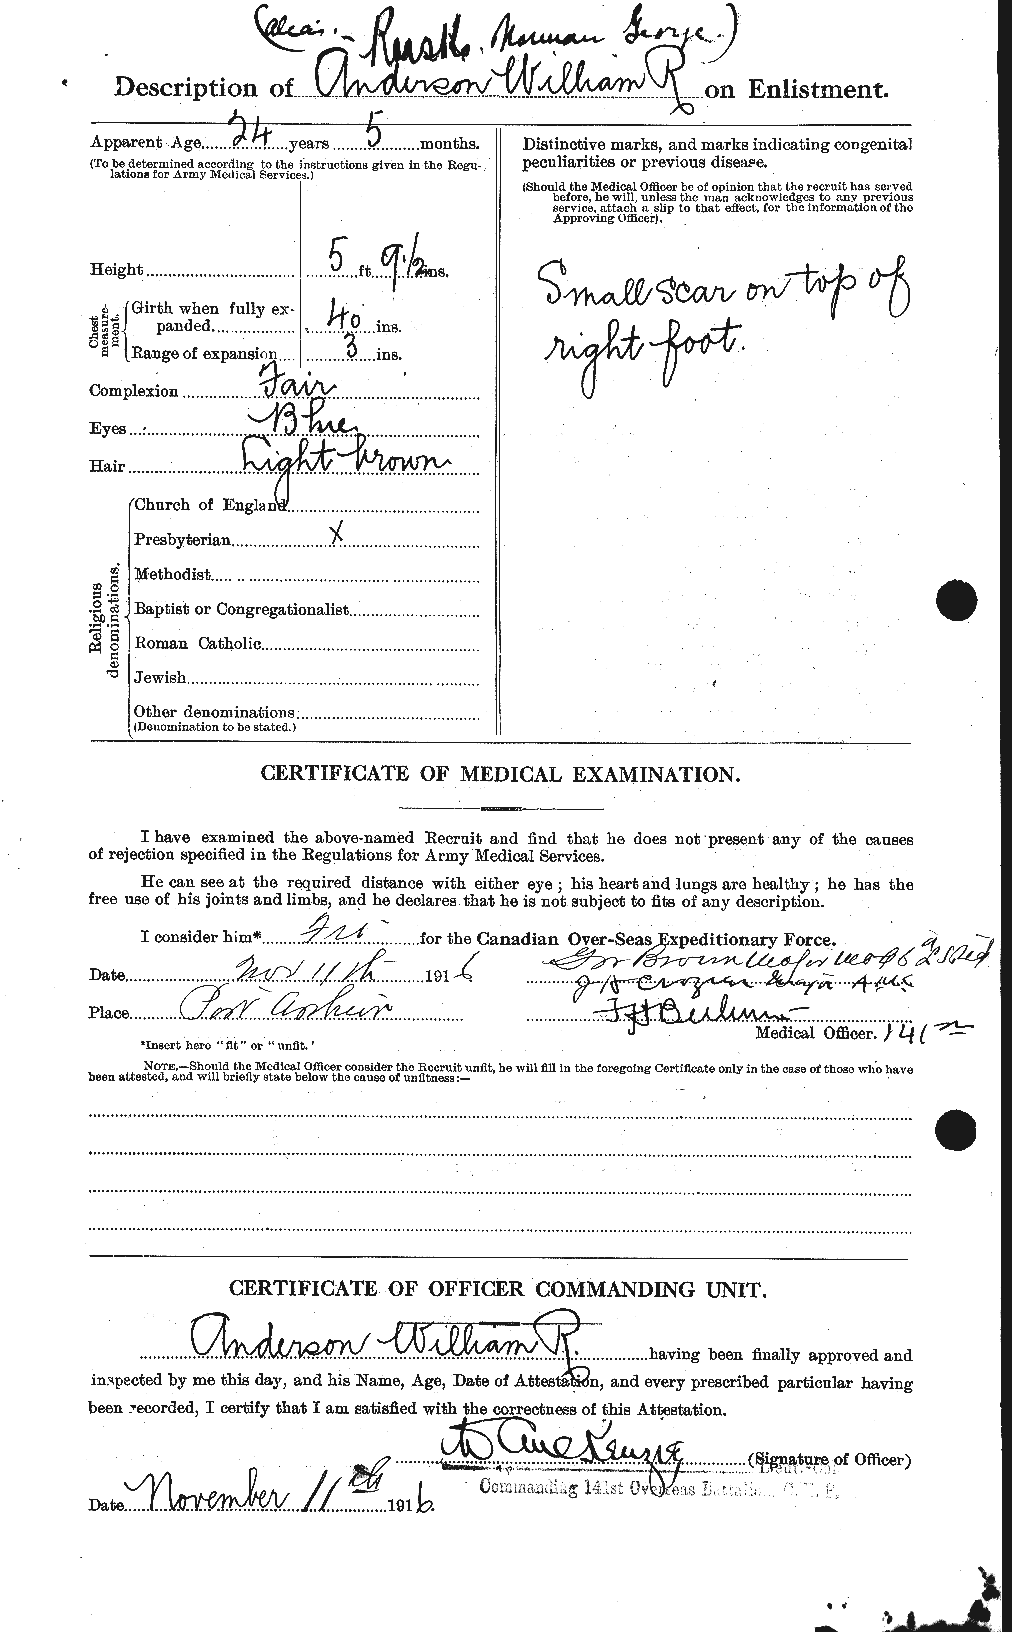 Personnel Records of the First World War - CEF 616878b